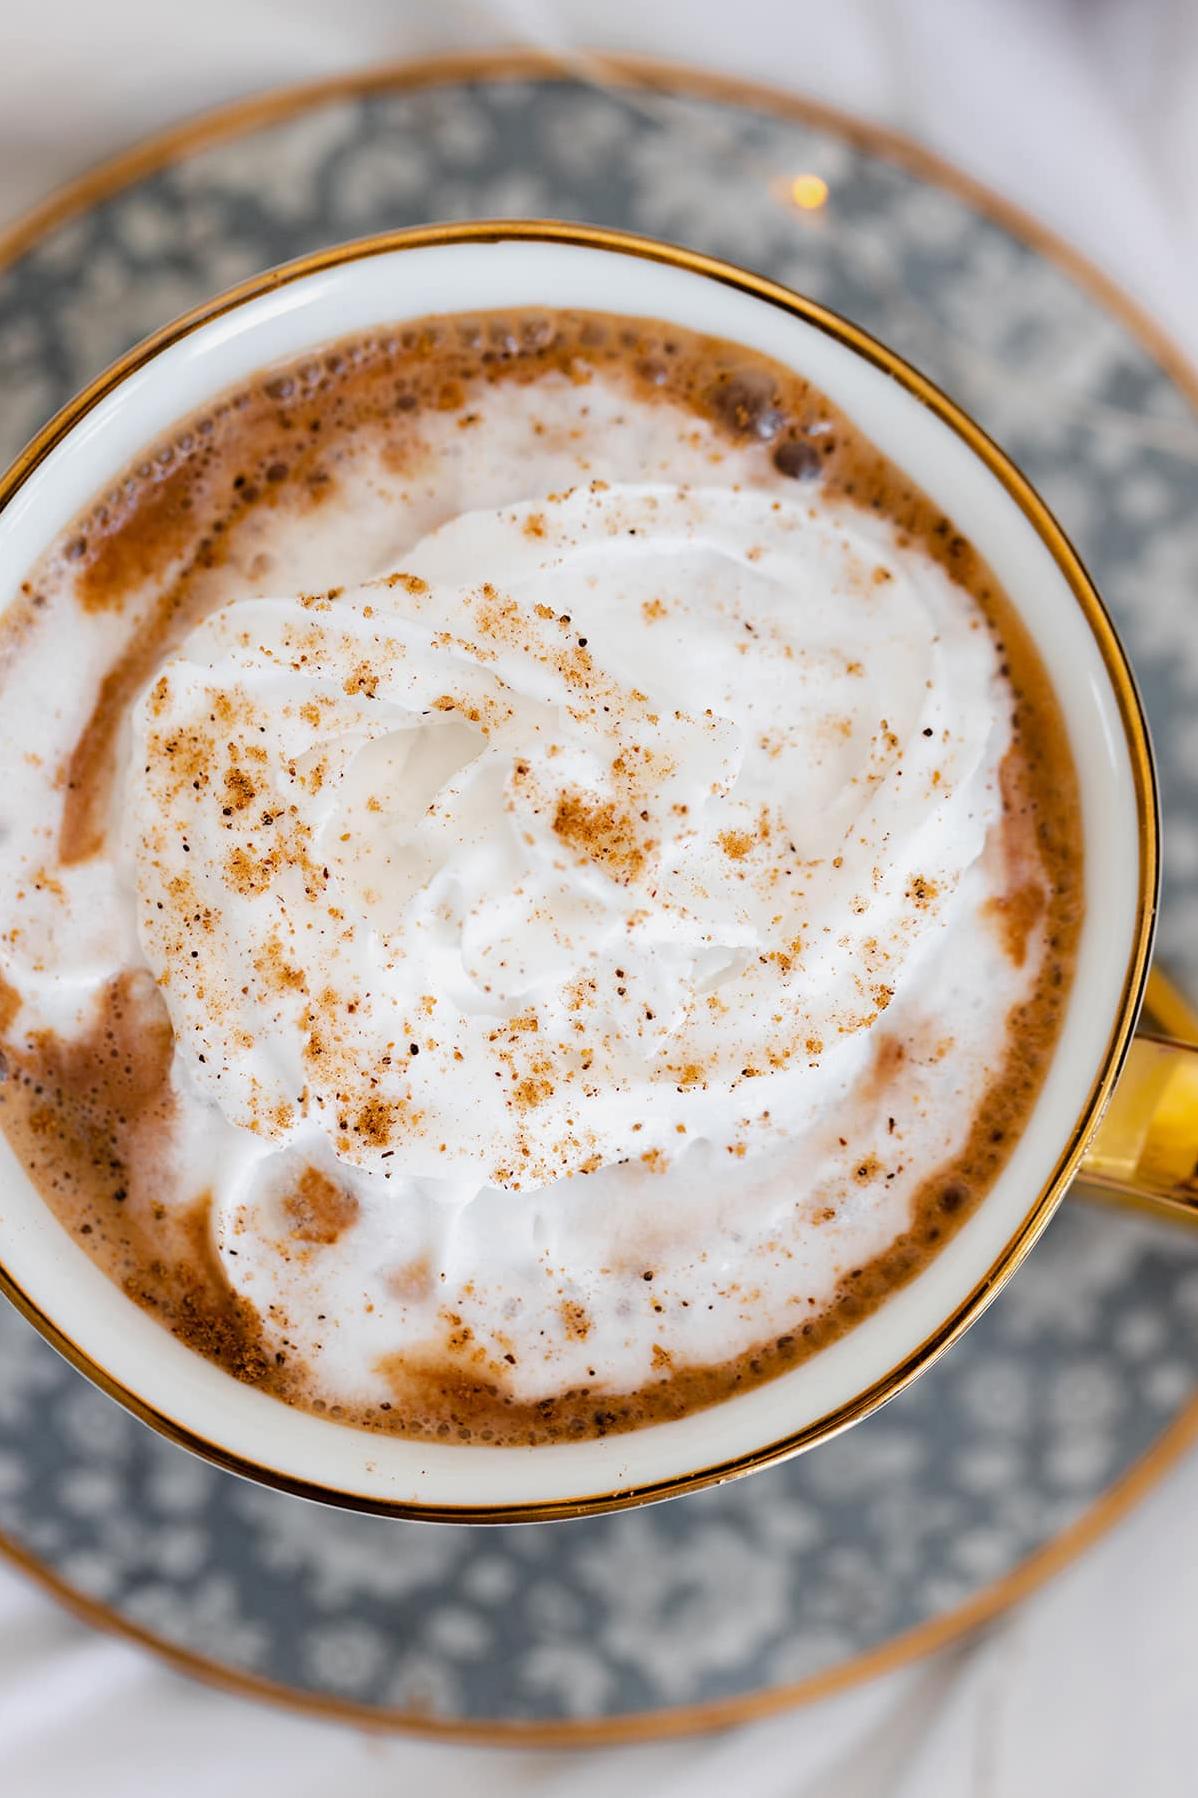  This decadent latte is the perfect way to add some holiday flair to your coffee routine.